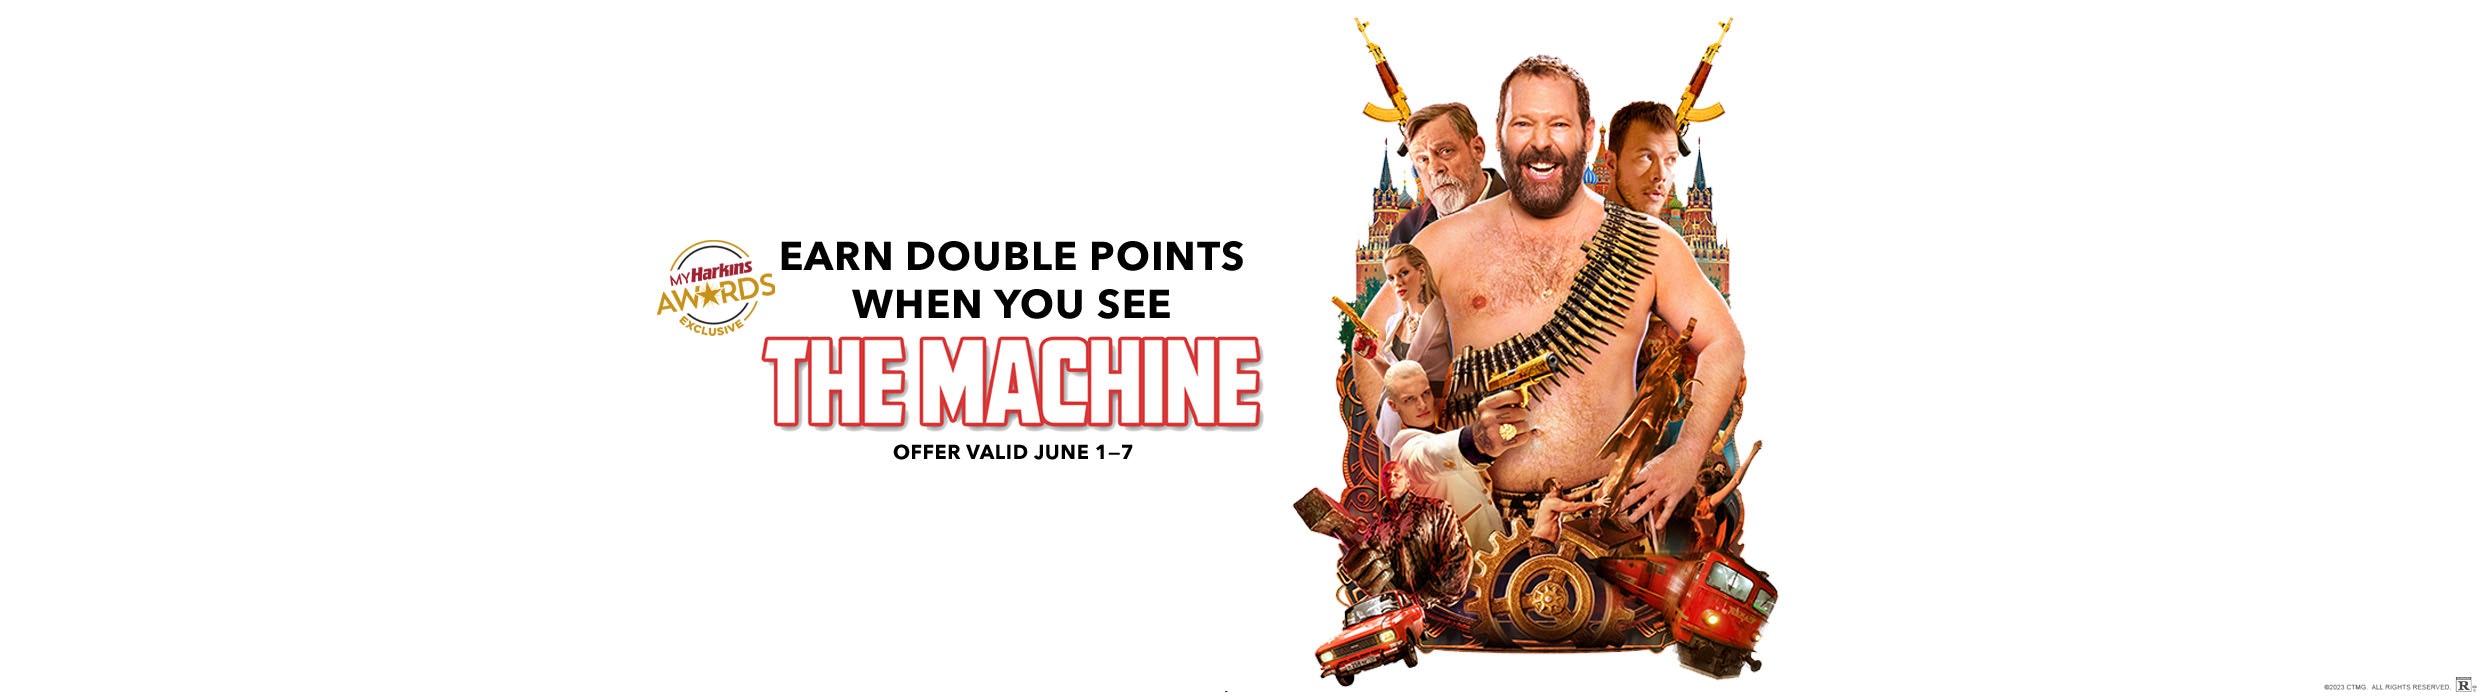 Large shirtless man smiles with gun amo around his chest in The Machine  - Tickets are on sale now at Harkins!